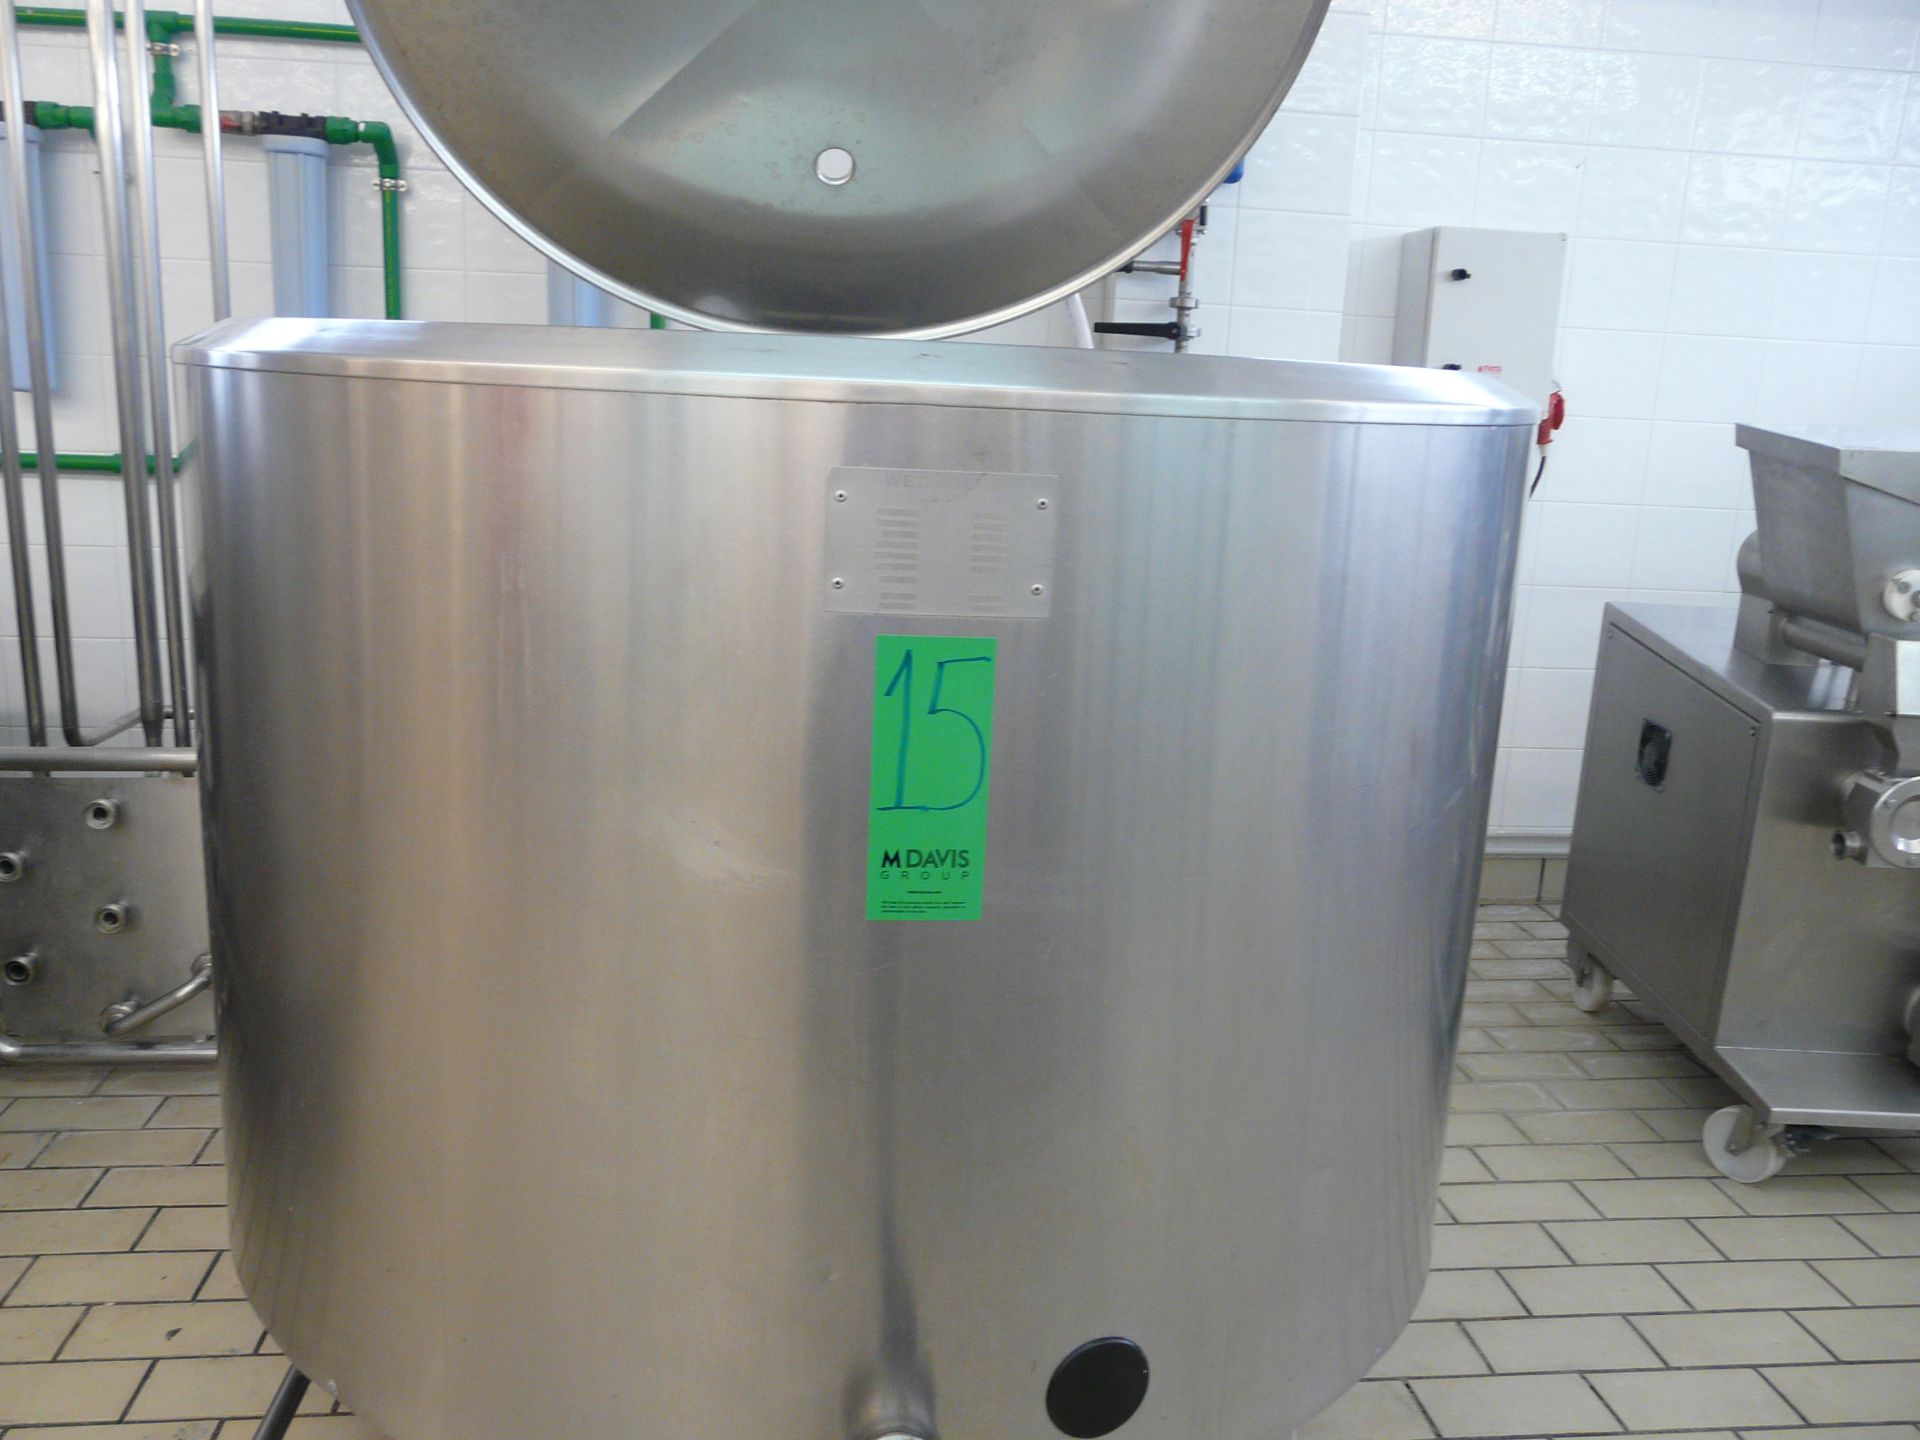 English: Mixing/Cooling Tank for Ice Cream 1020L with Agitator, Type WEDHOLMS, Self Contained - Image 2 of 5